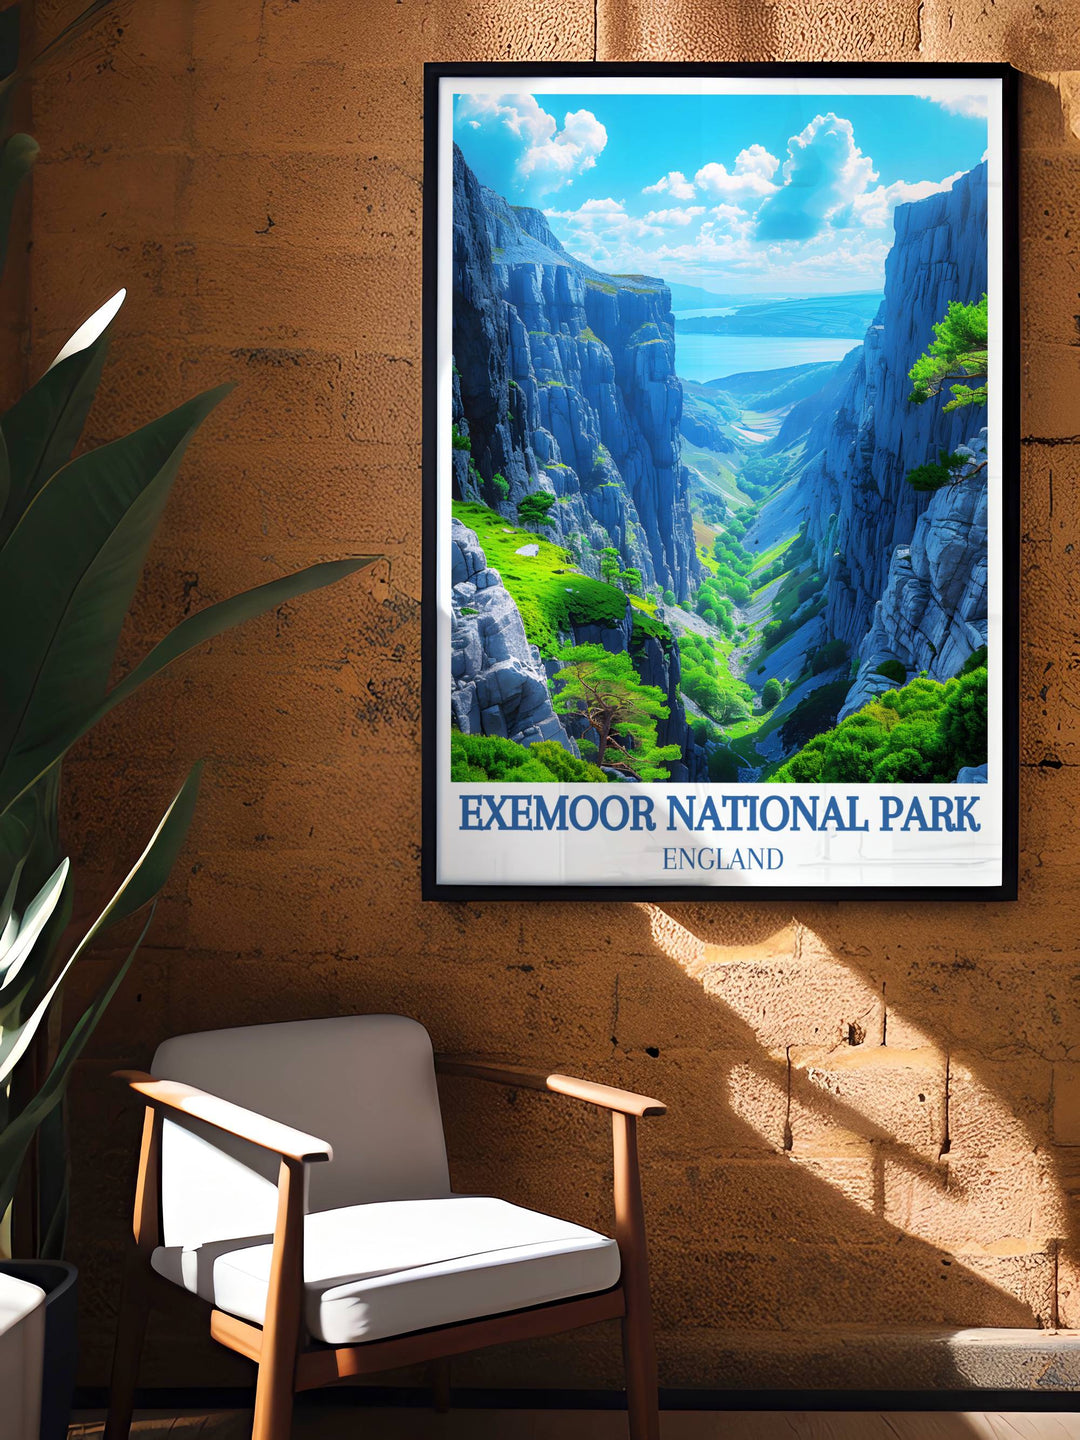 Valley of the Rocks in autumn, with the foliage adding a splash of color to the grey stones, beautifully captured in an Exmoor National Park poster..